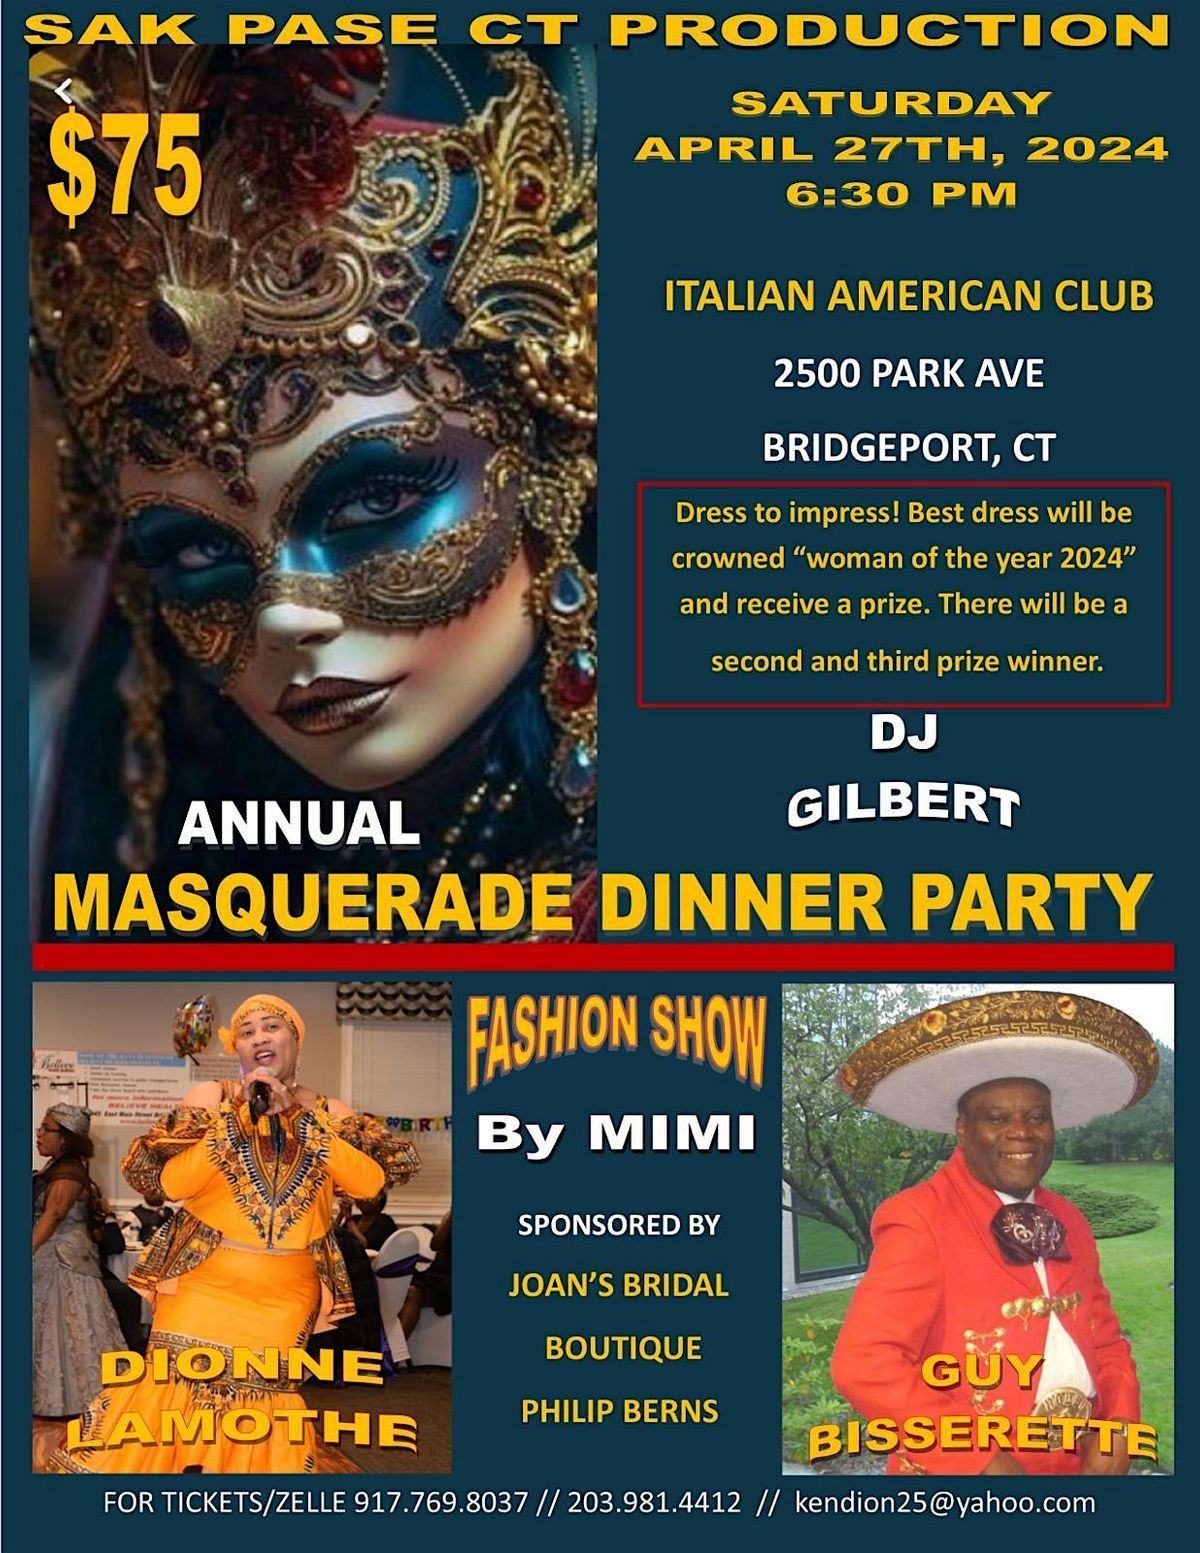 Annual Masquerade Dinner Party